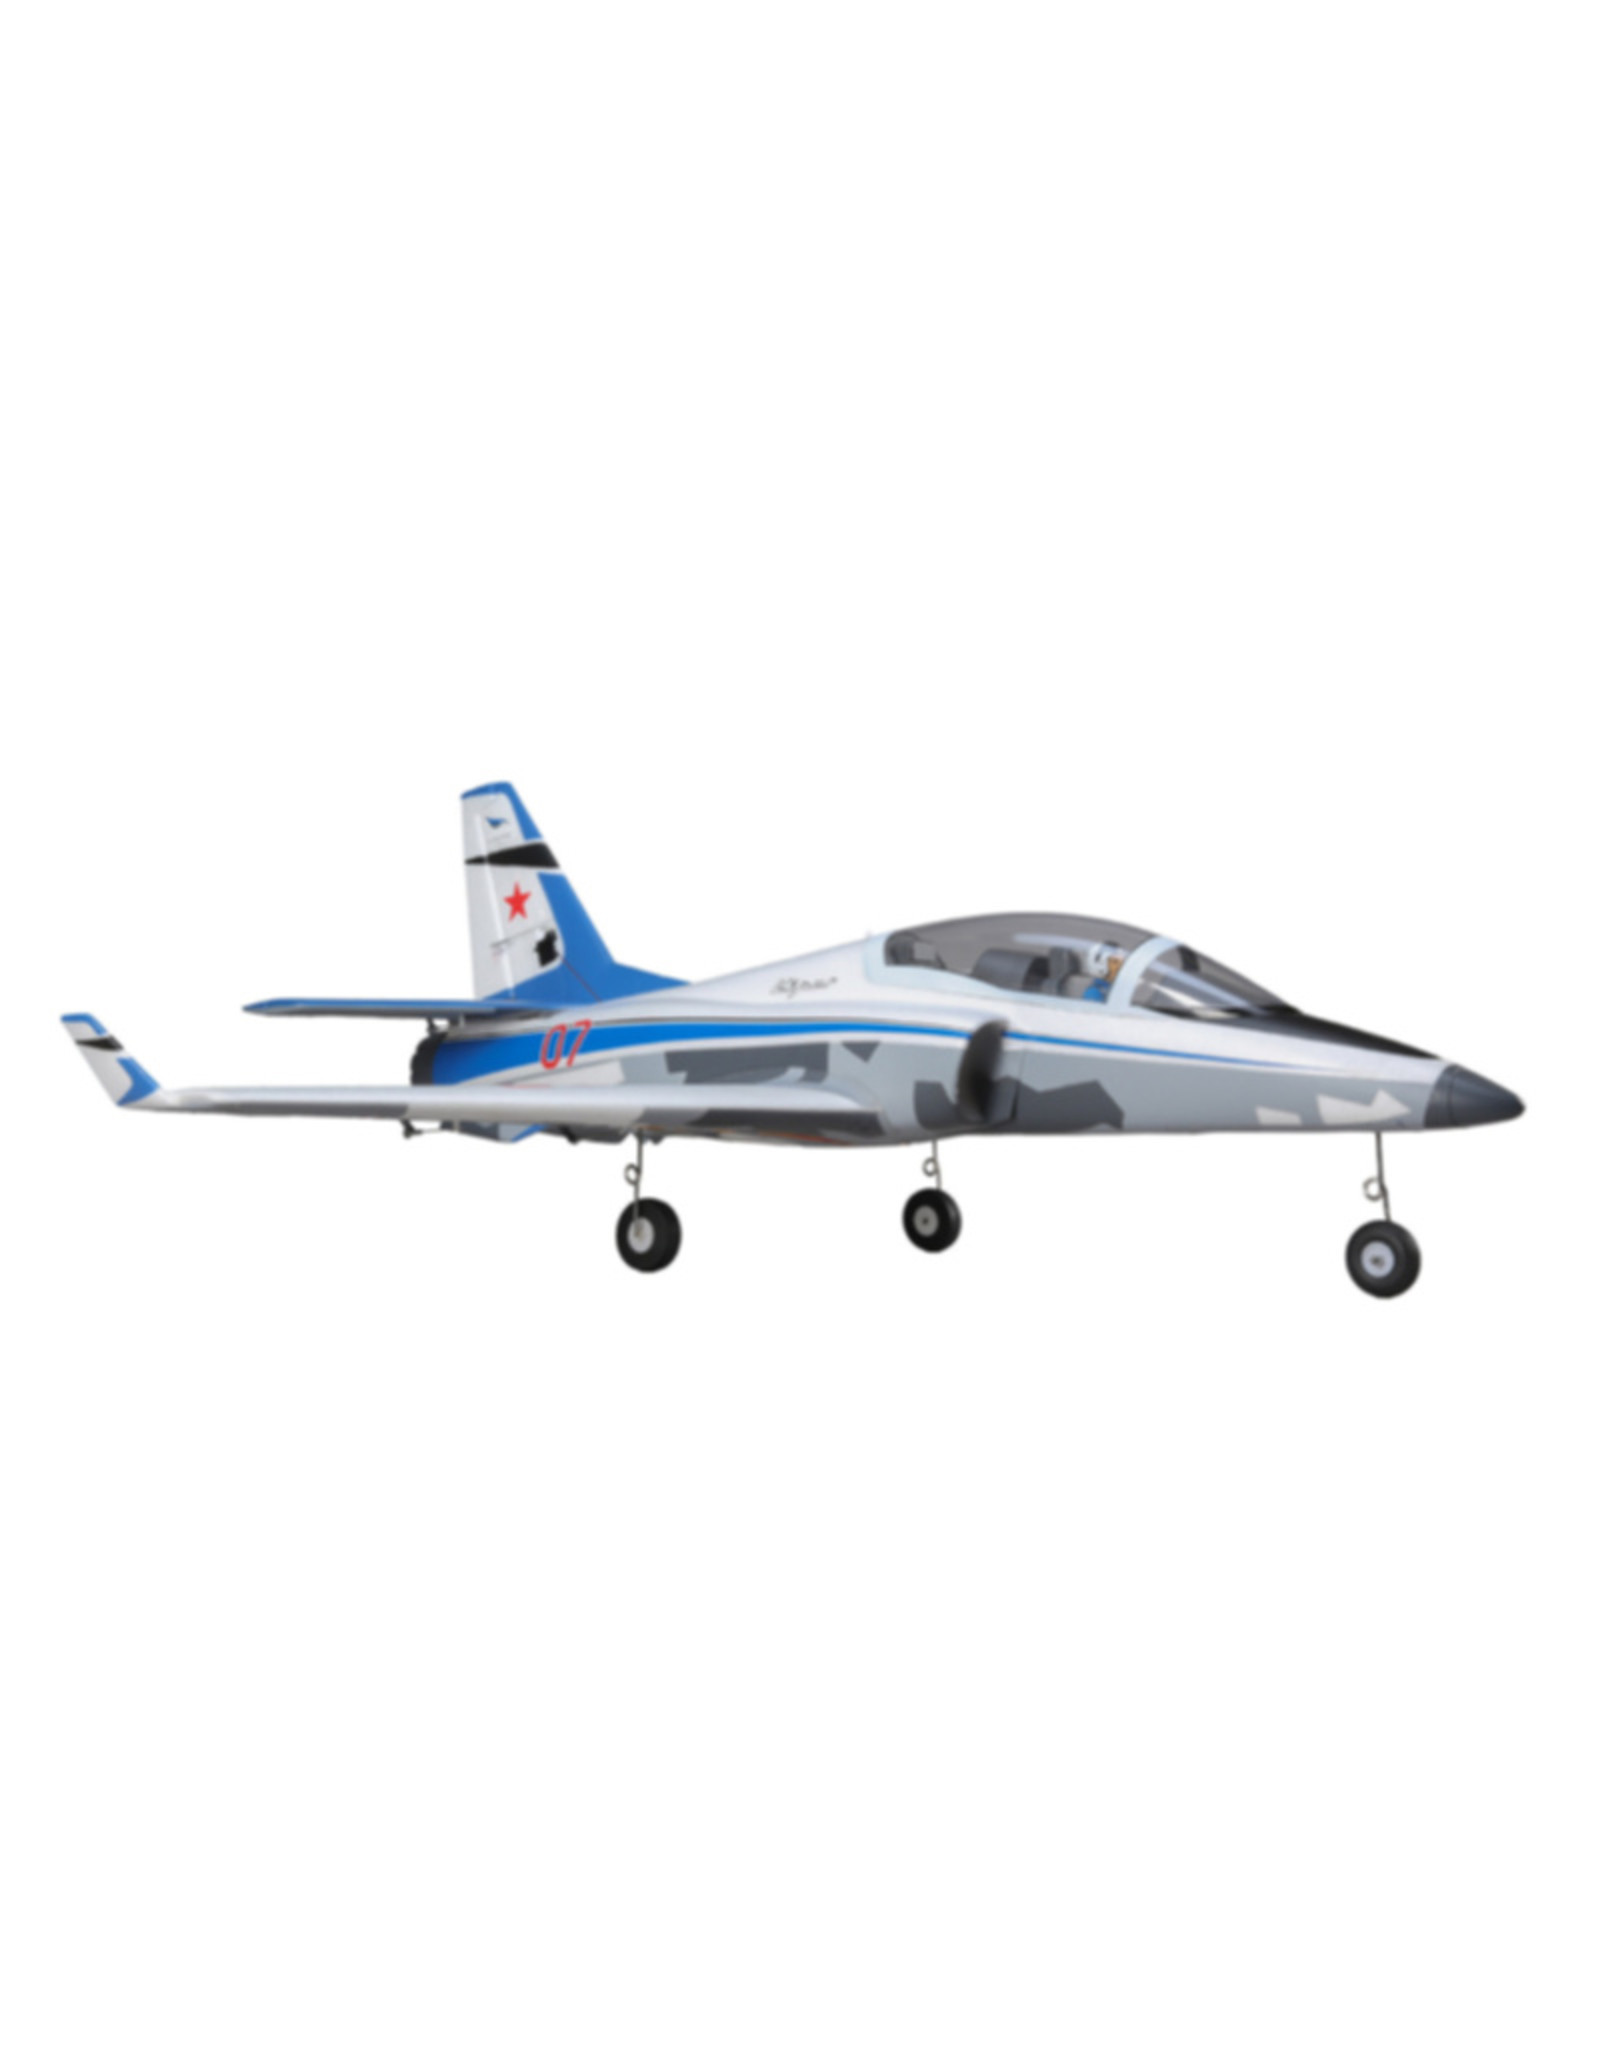 eflite EFL77500 Viper 70mm EDF Jet BNF Basic with AS3X and SAFE Select